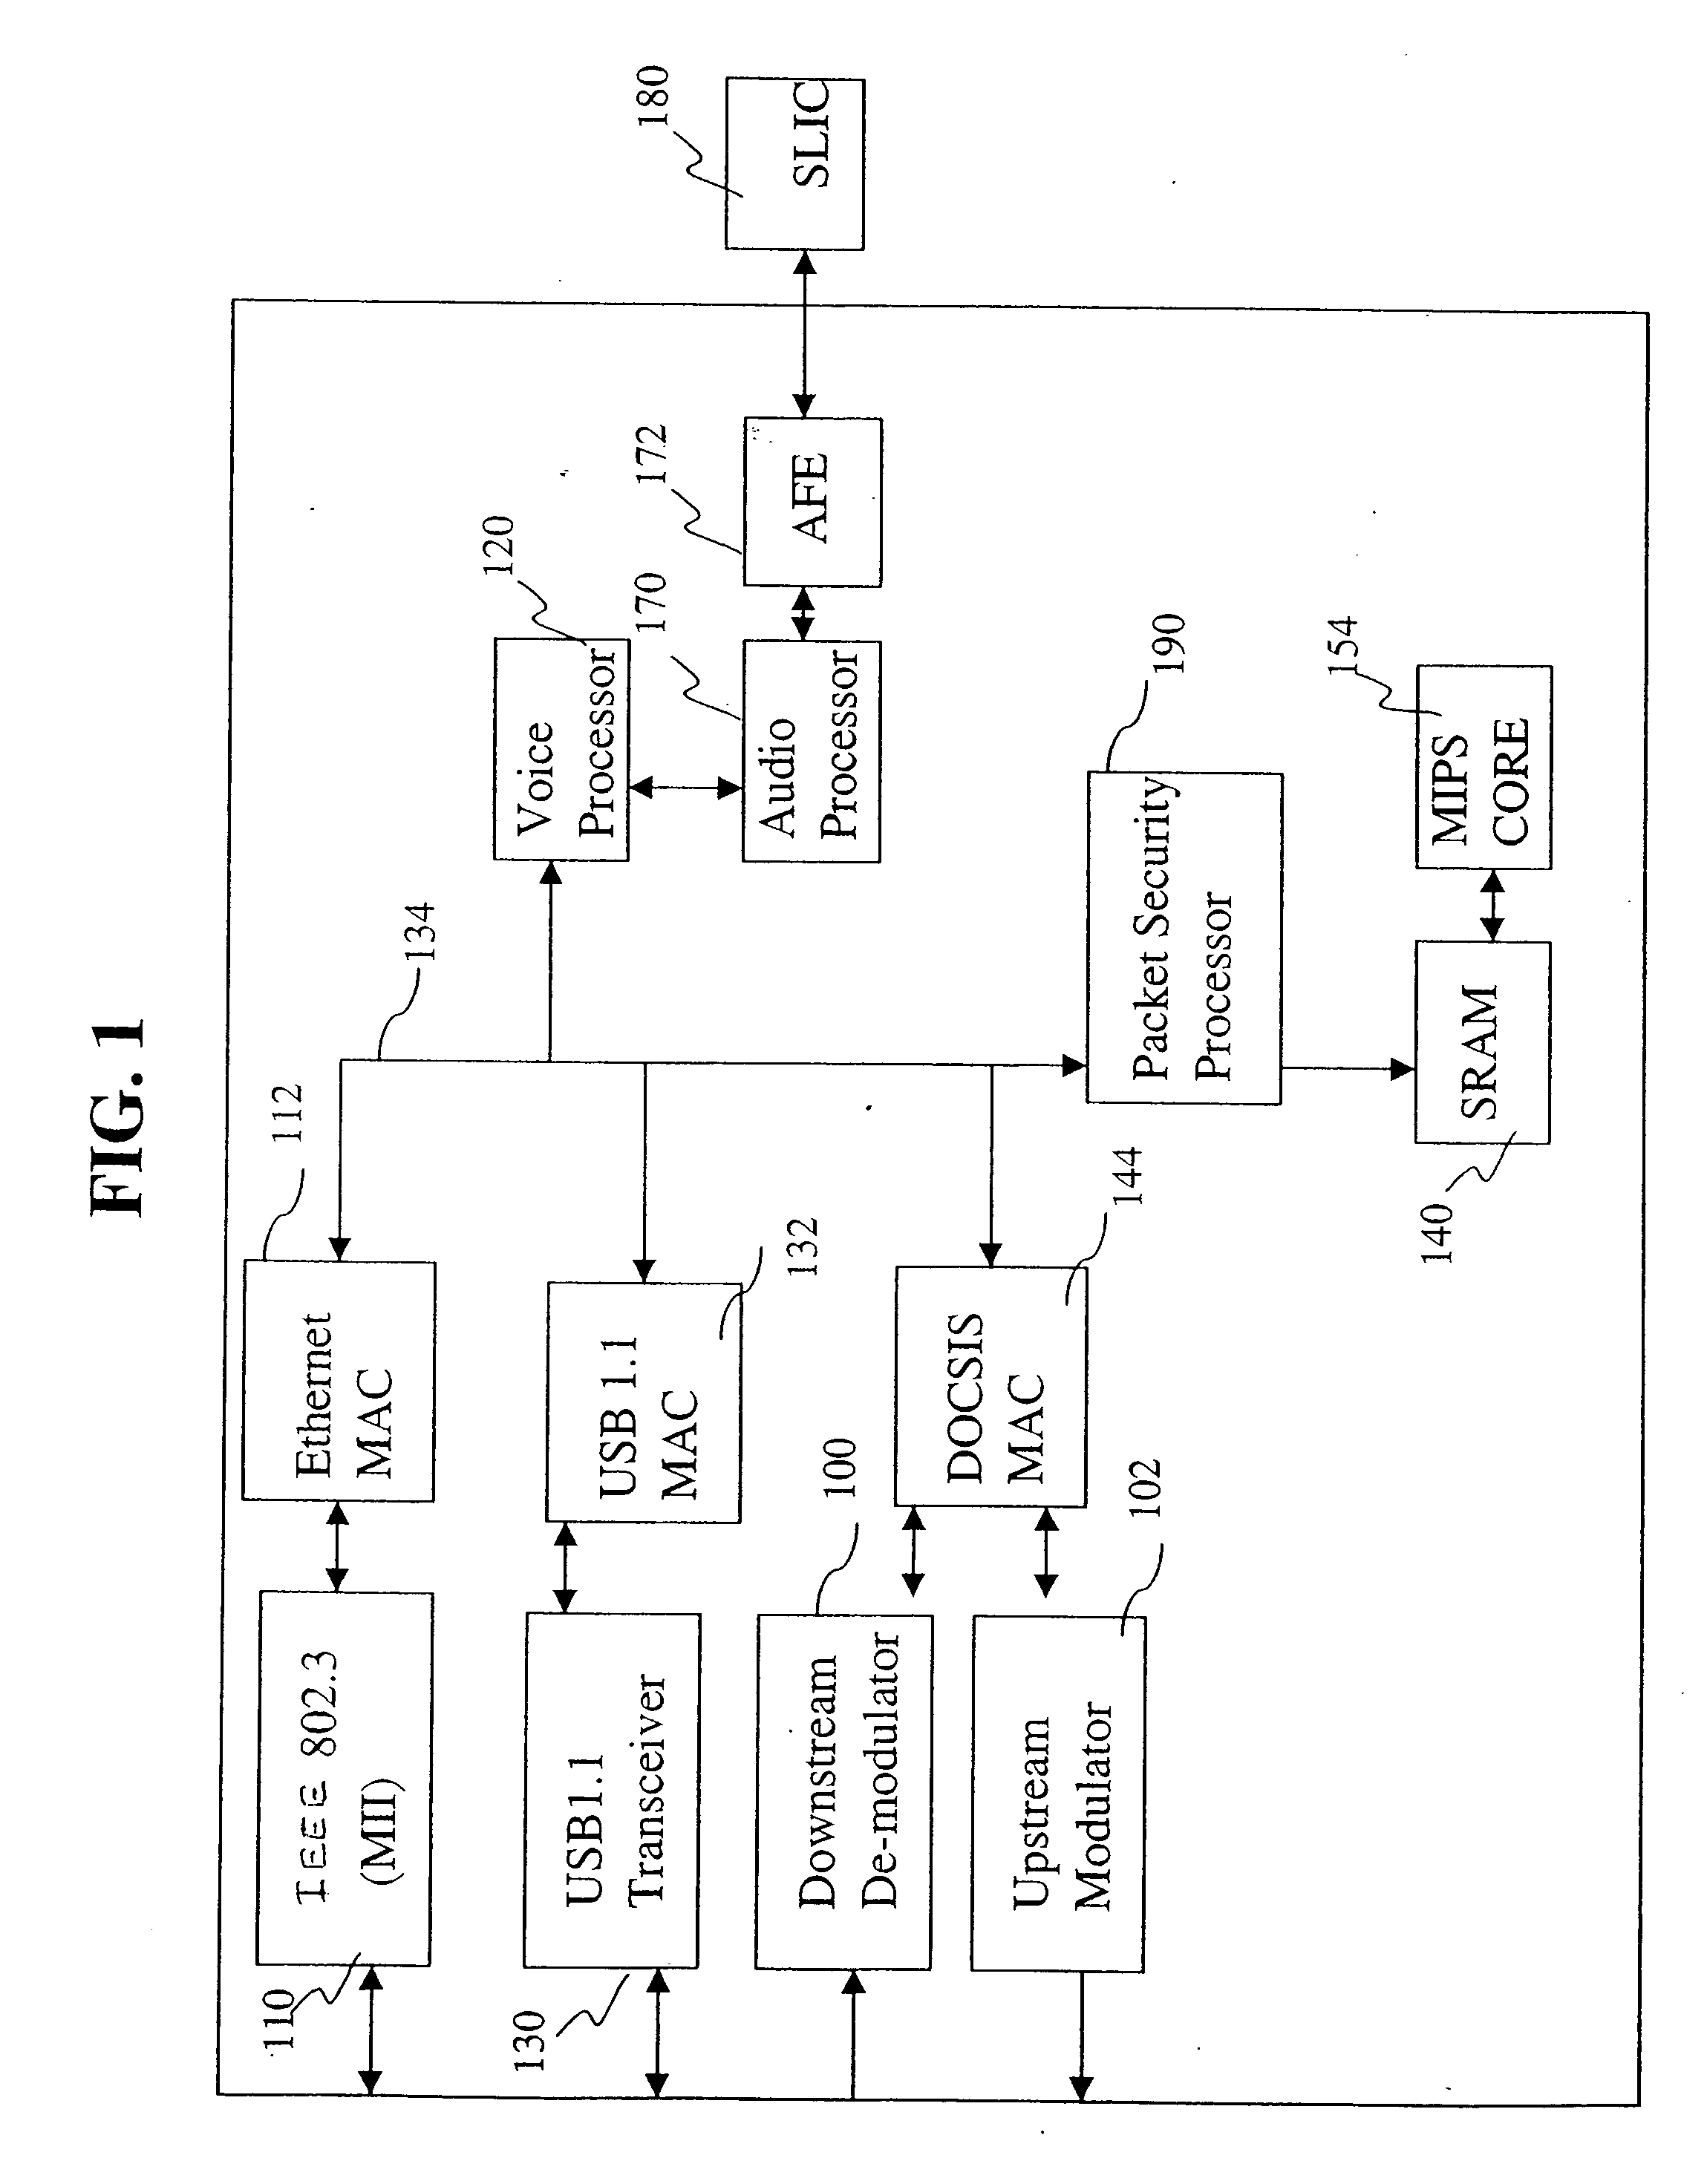 Method for processing multiple wireless communications security policies